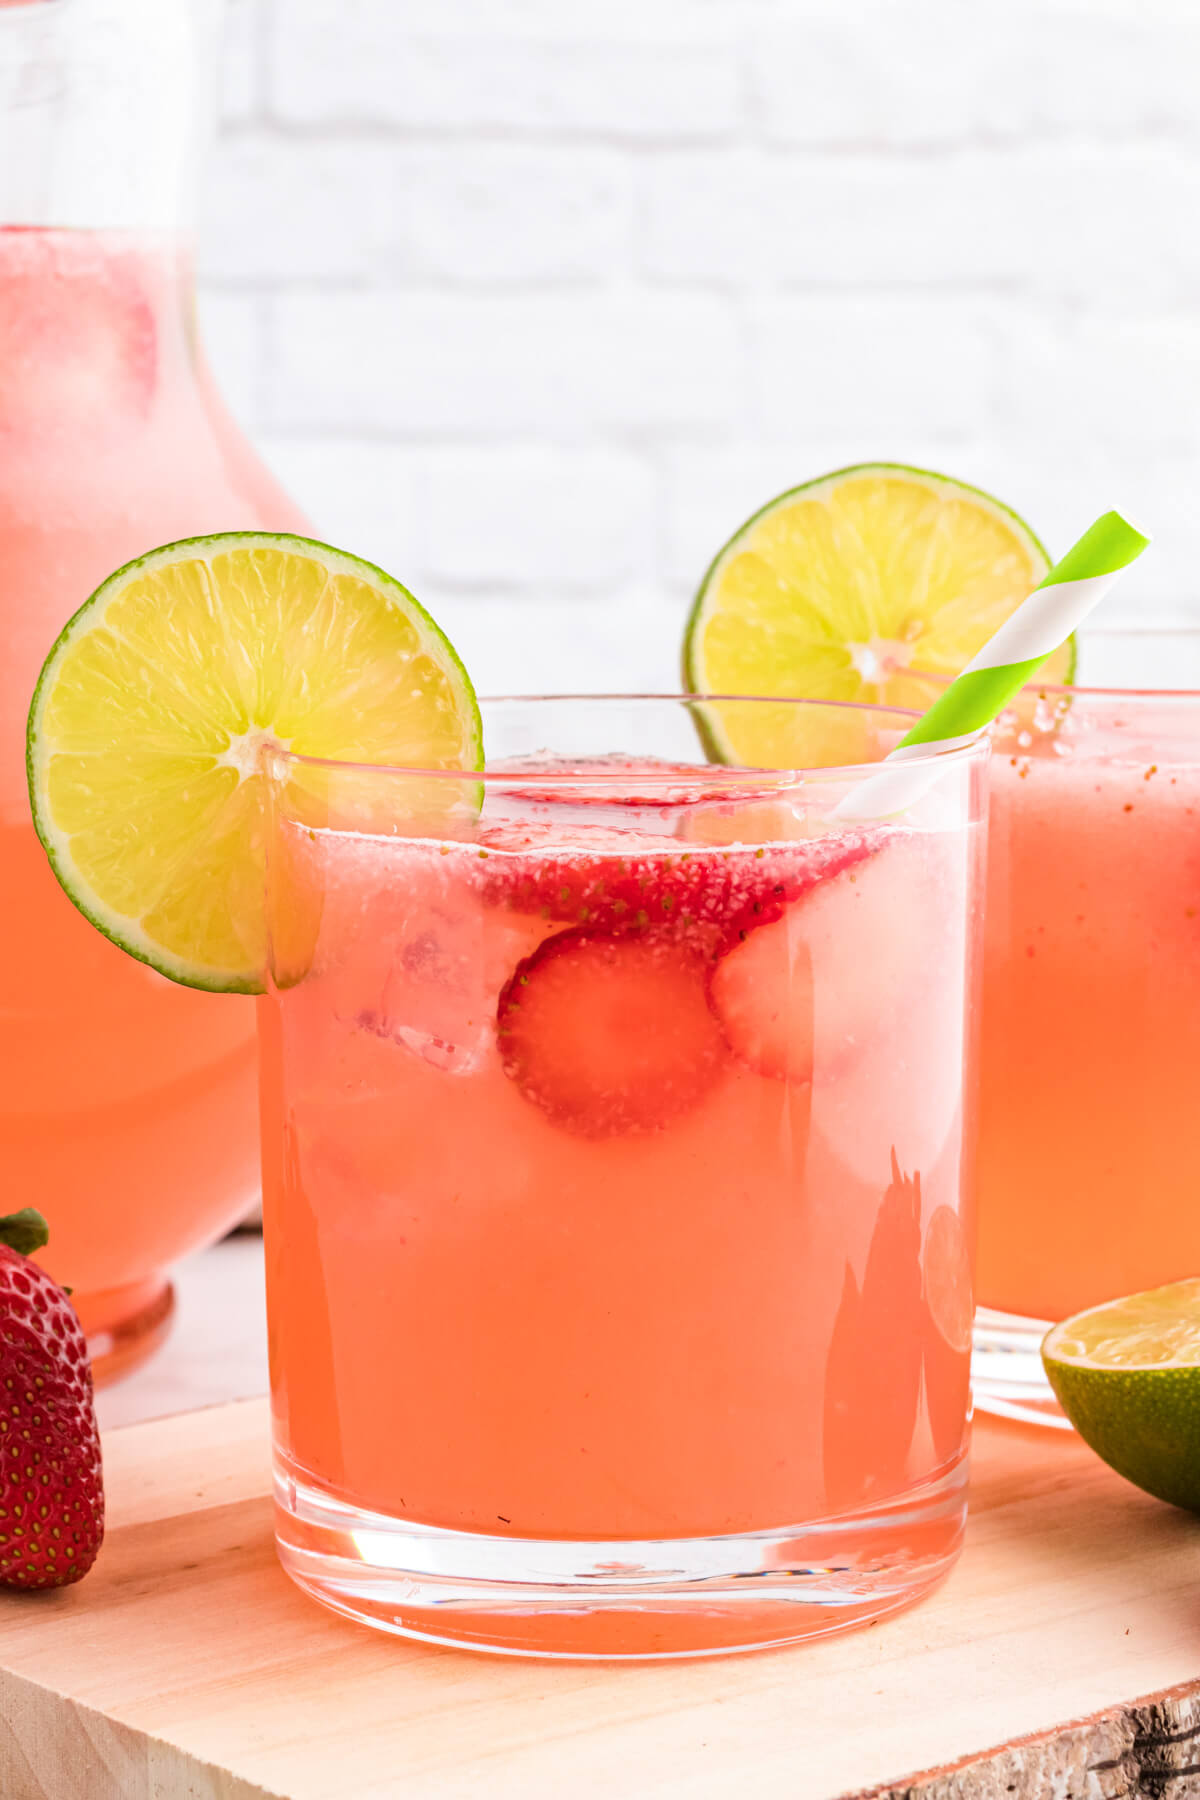 A glass pitcher and glass full of pink Strawberry Limeade garnished with sliced strawberries and lime wheels.